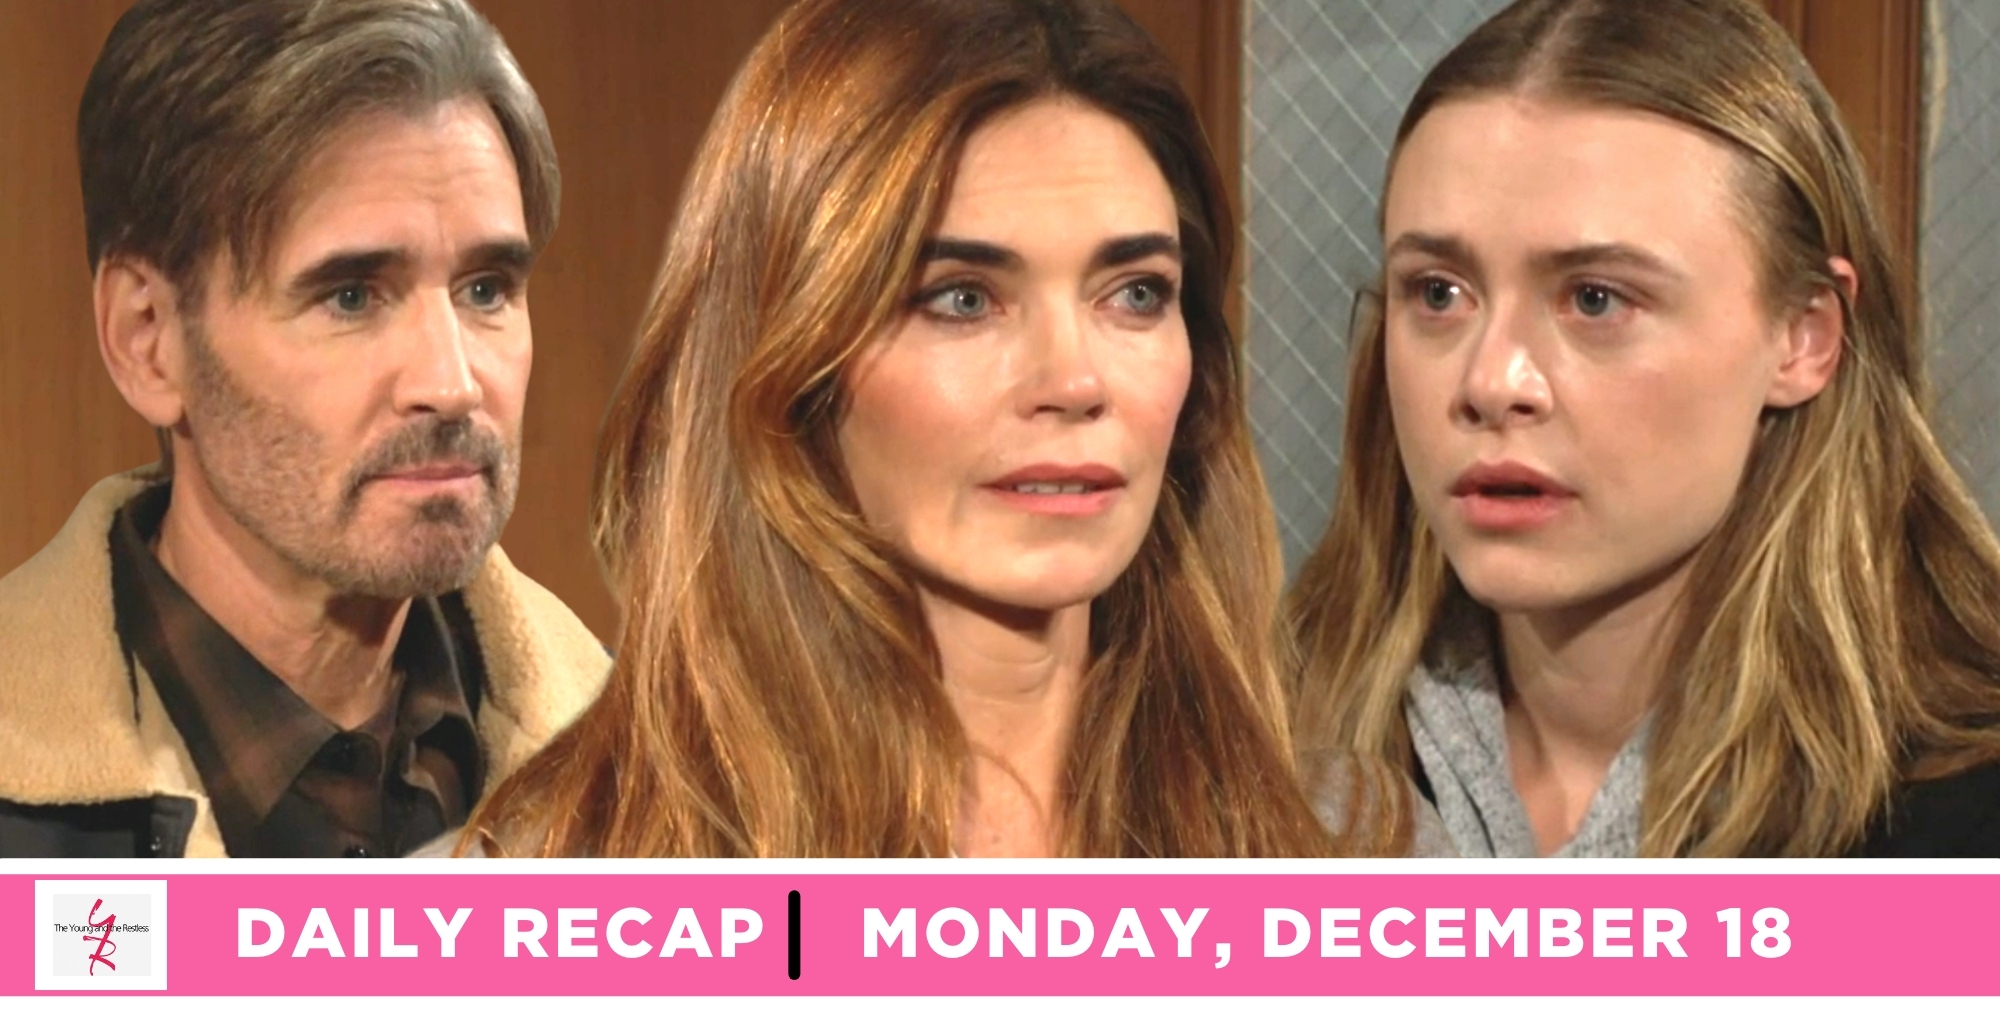 young and the restless recap for monday, december 18, 2023 features cole howard, victoria newman, and claire grace.